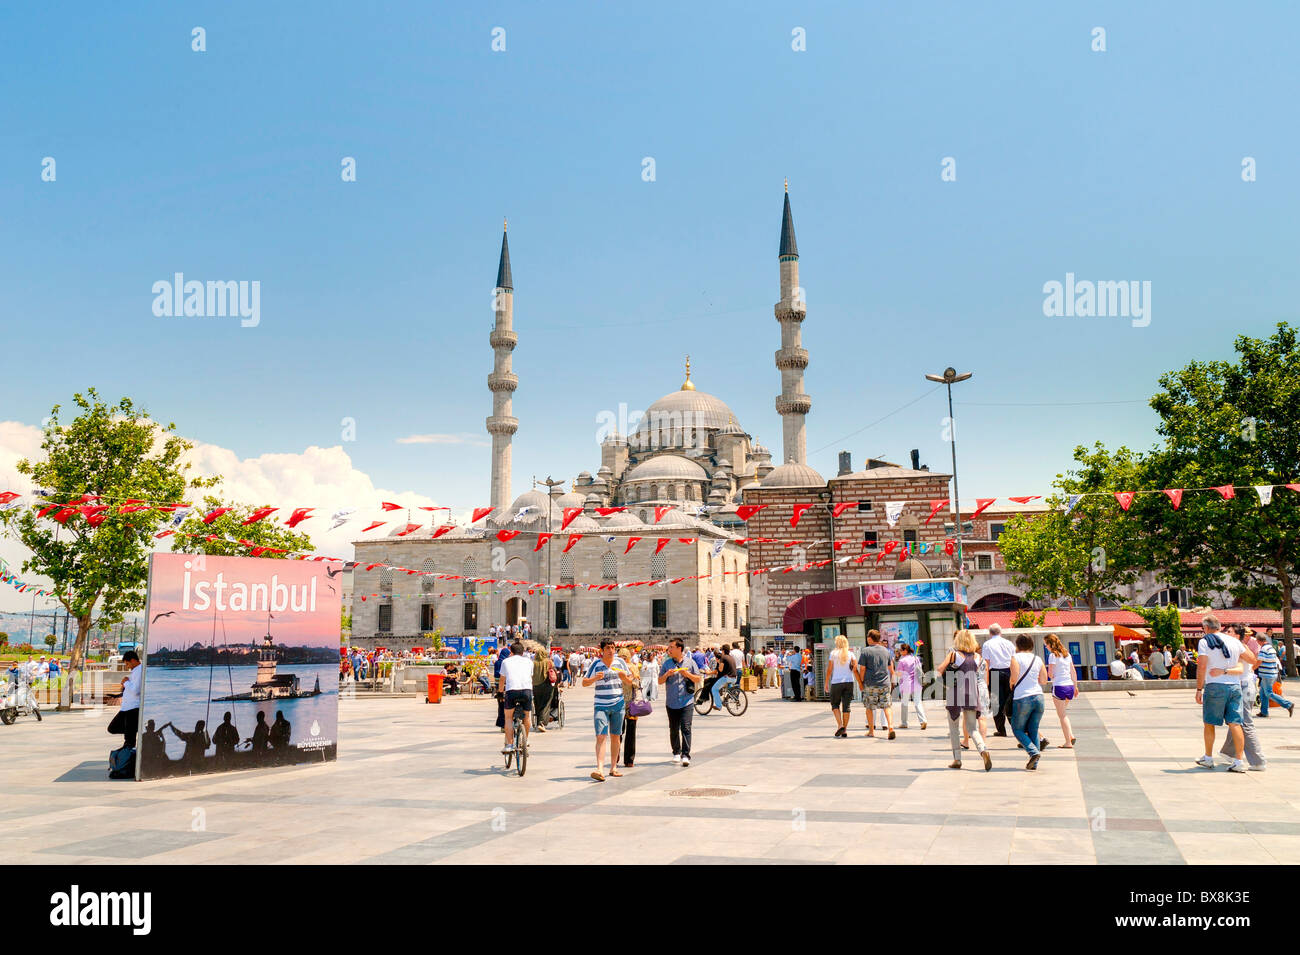 Yeni Cami Mosque (also known as the New Mosque) Istanbul Turkey Stock Photo